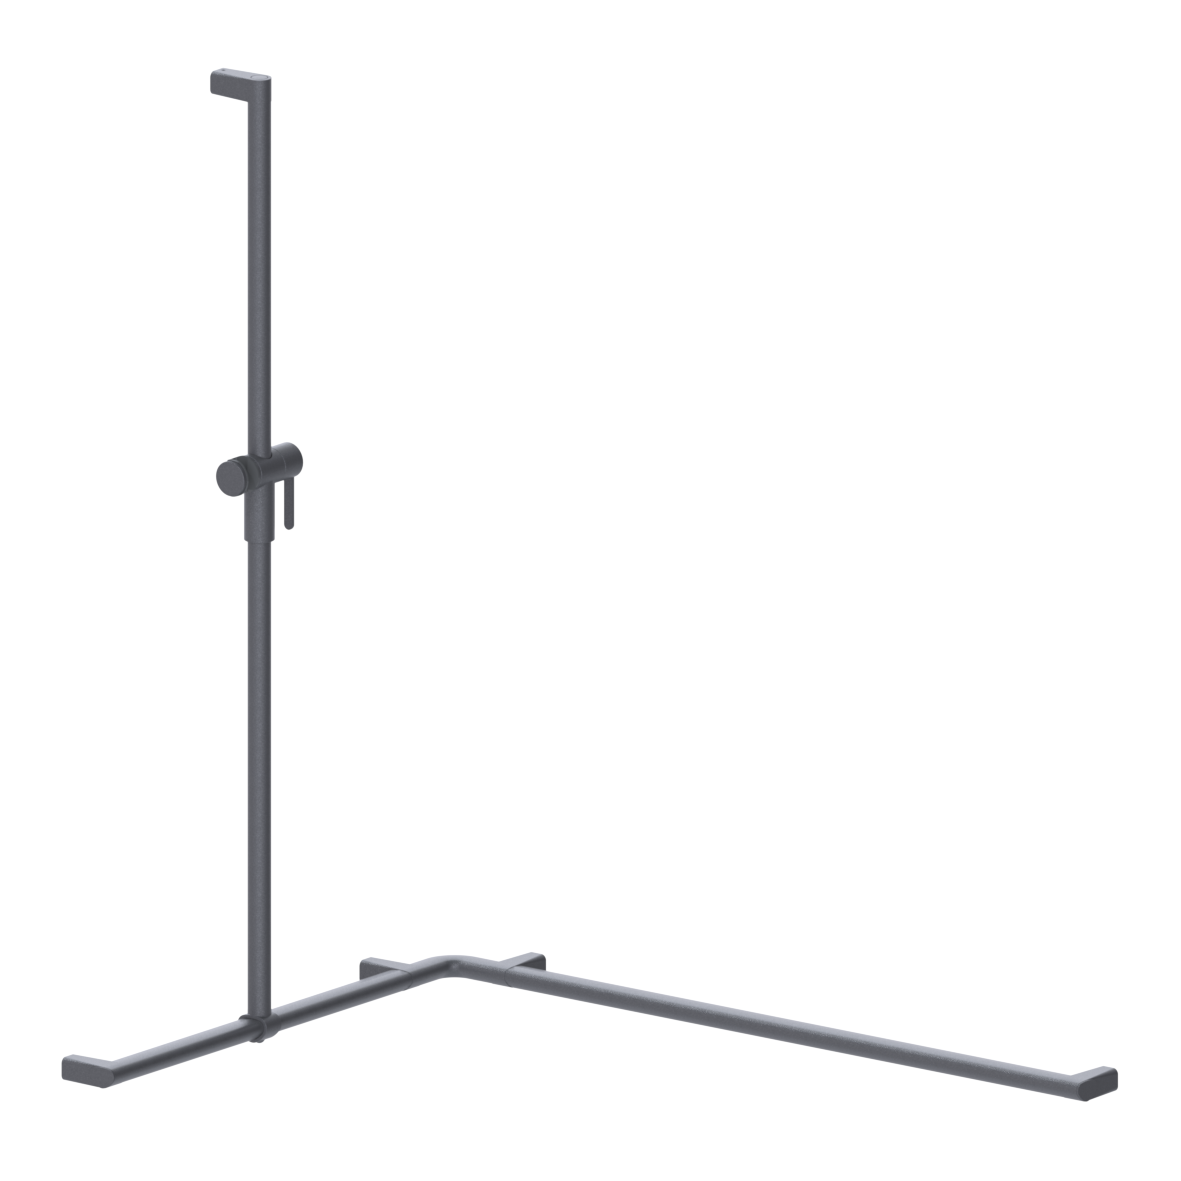 Cavere Care Shower handrail, with movable shower handrail, left and right, 1050 x 750 x 1200 mm, single-point mounting, Cavere Metallic anthracite